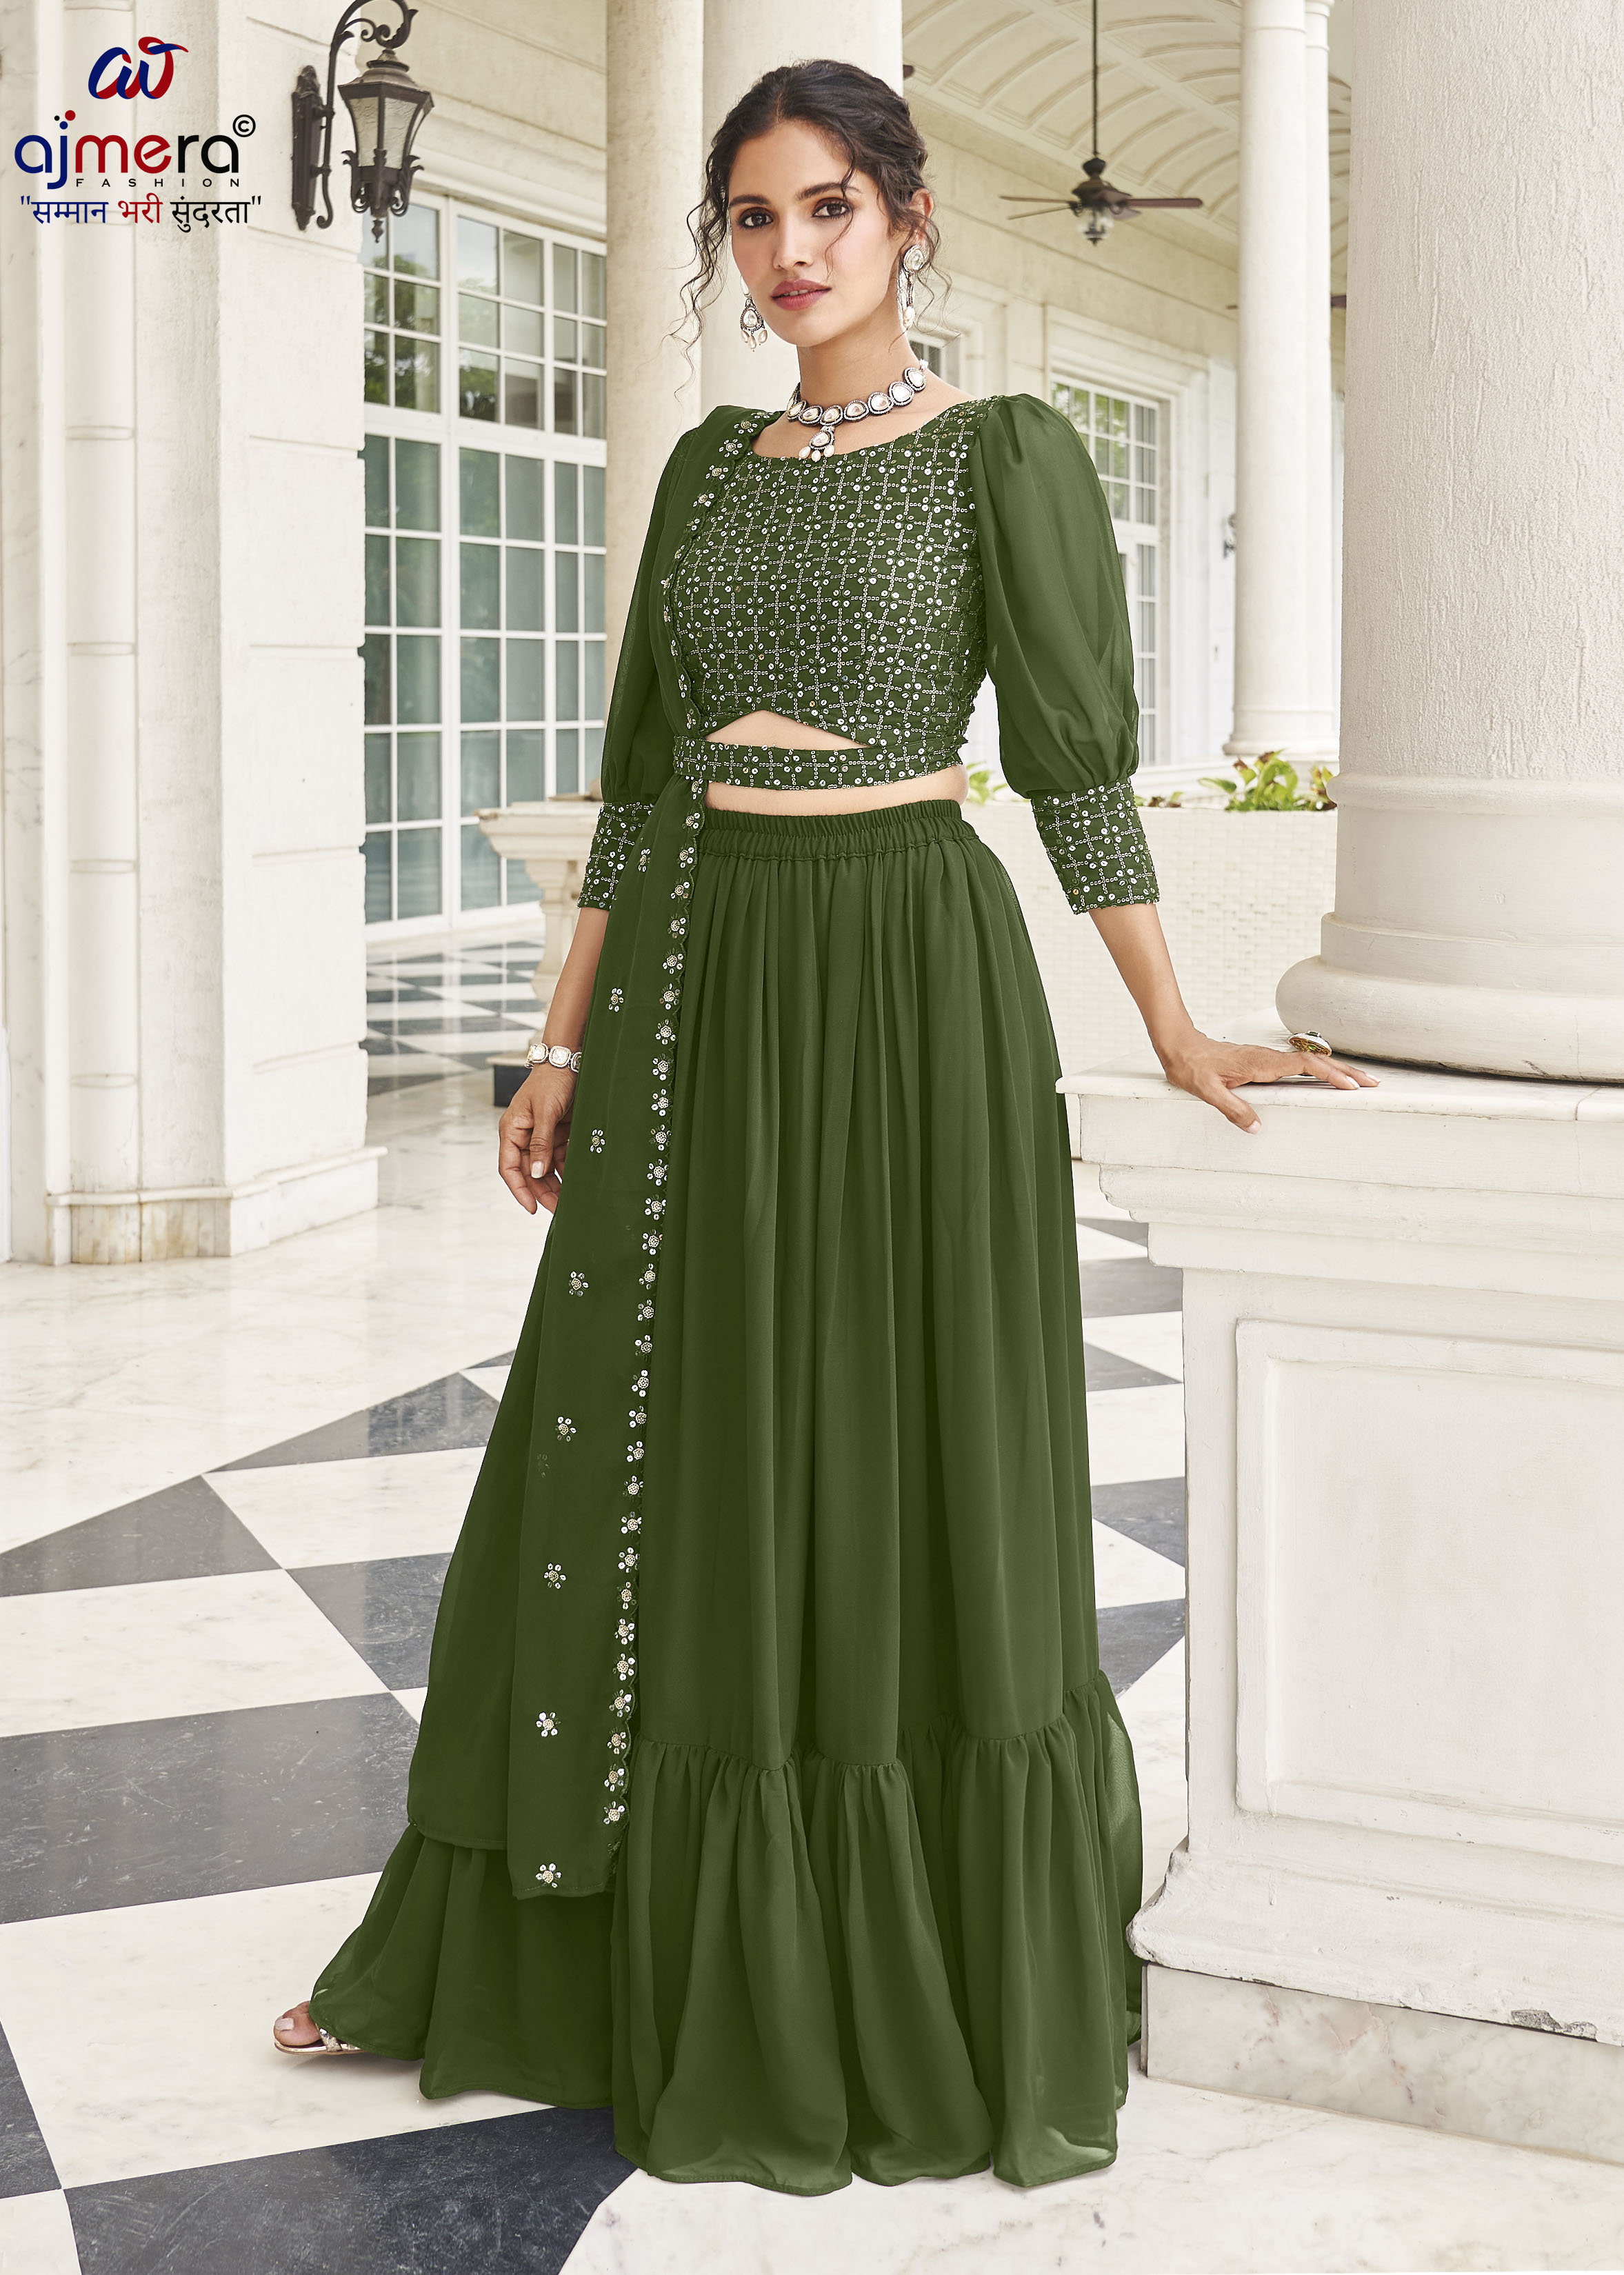 Partywear Lahenga Manufacturers, Suppliers in Hyderabad